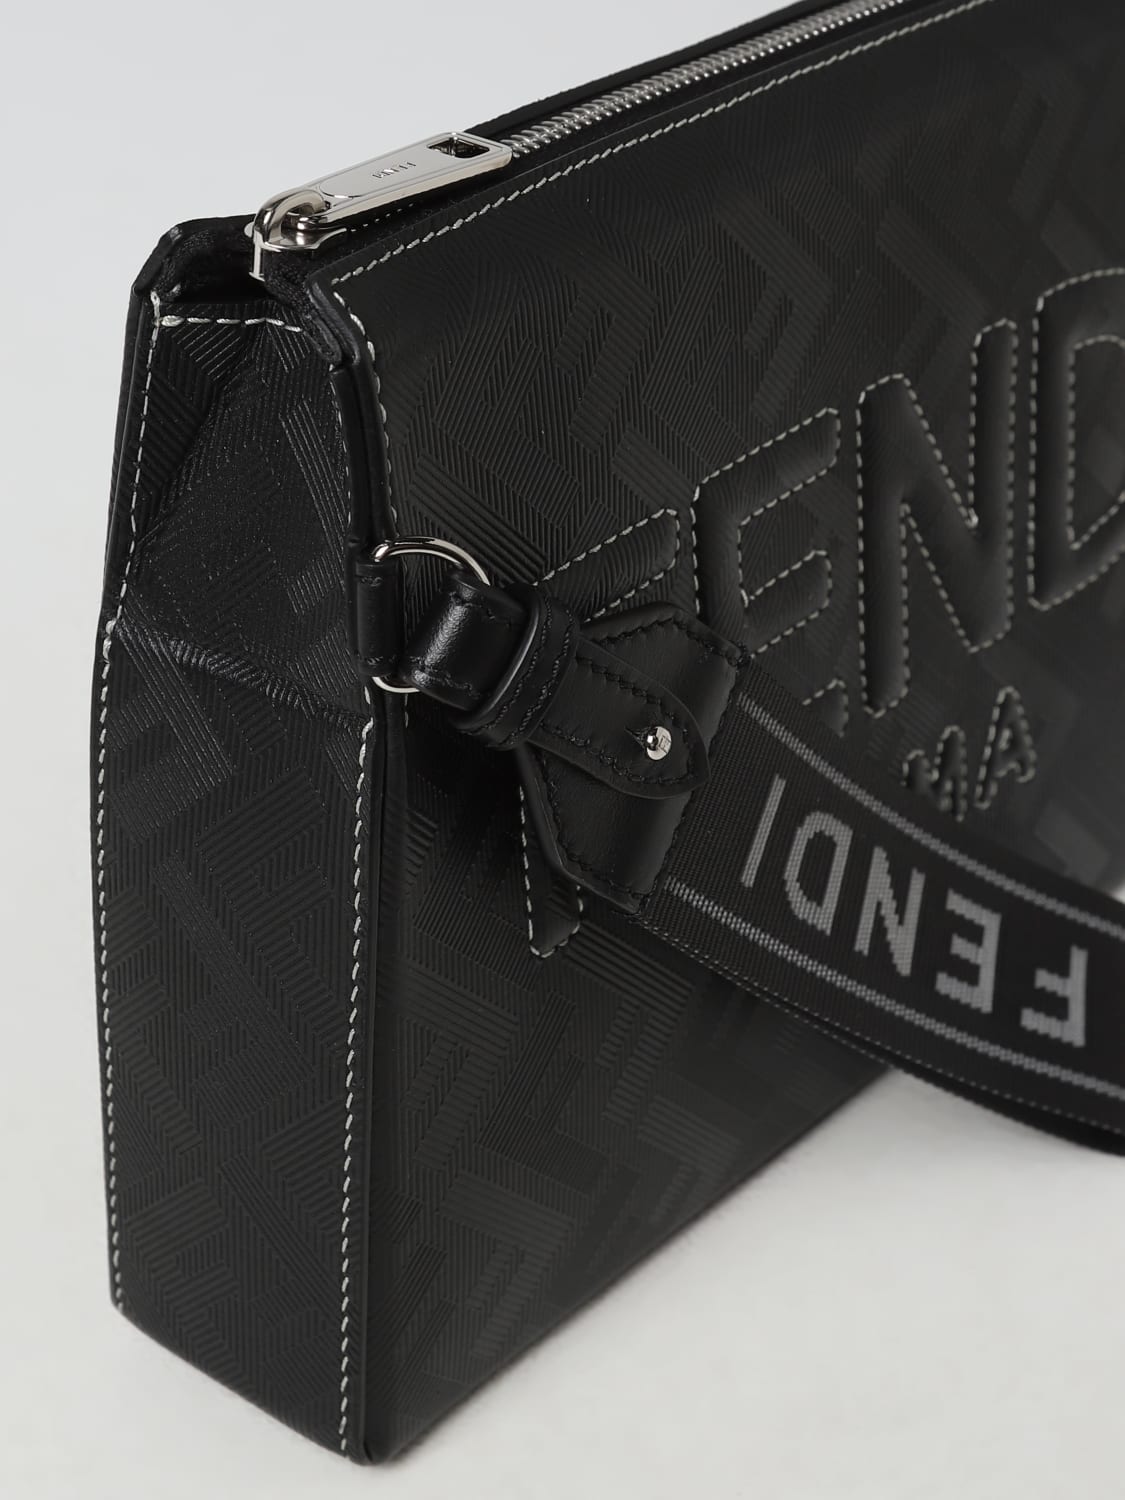 Fendi Leather And Ff Fabric Clutch Bag for Men